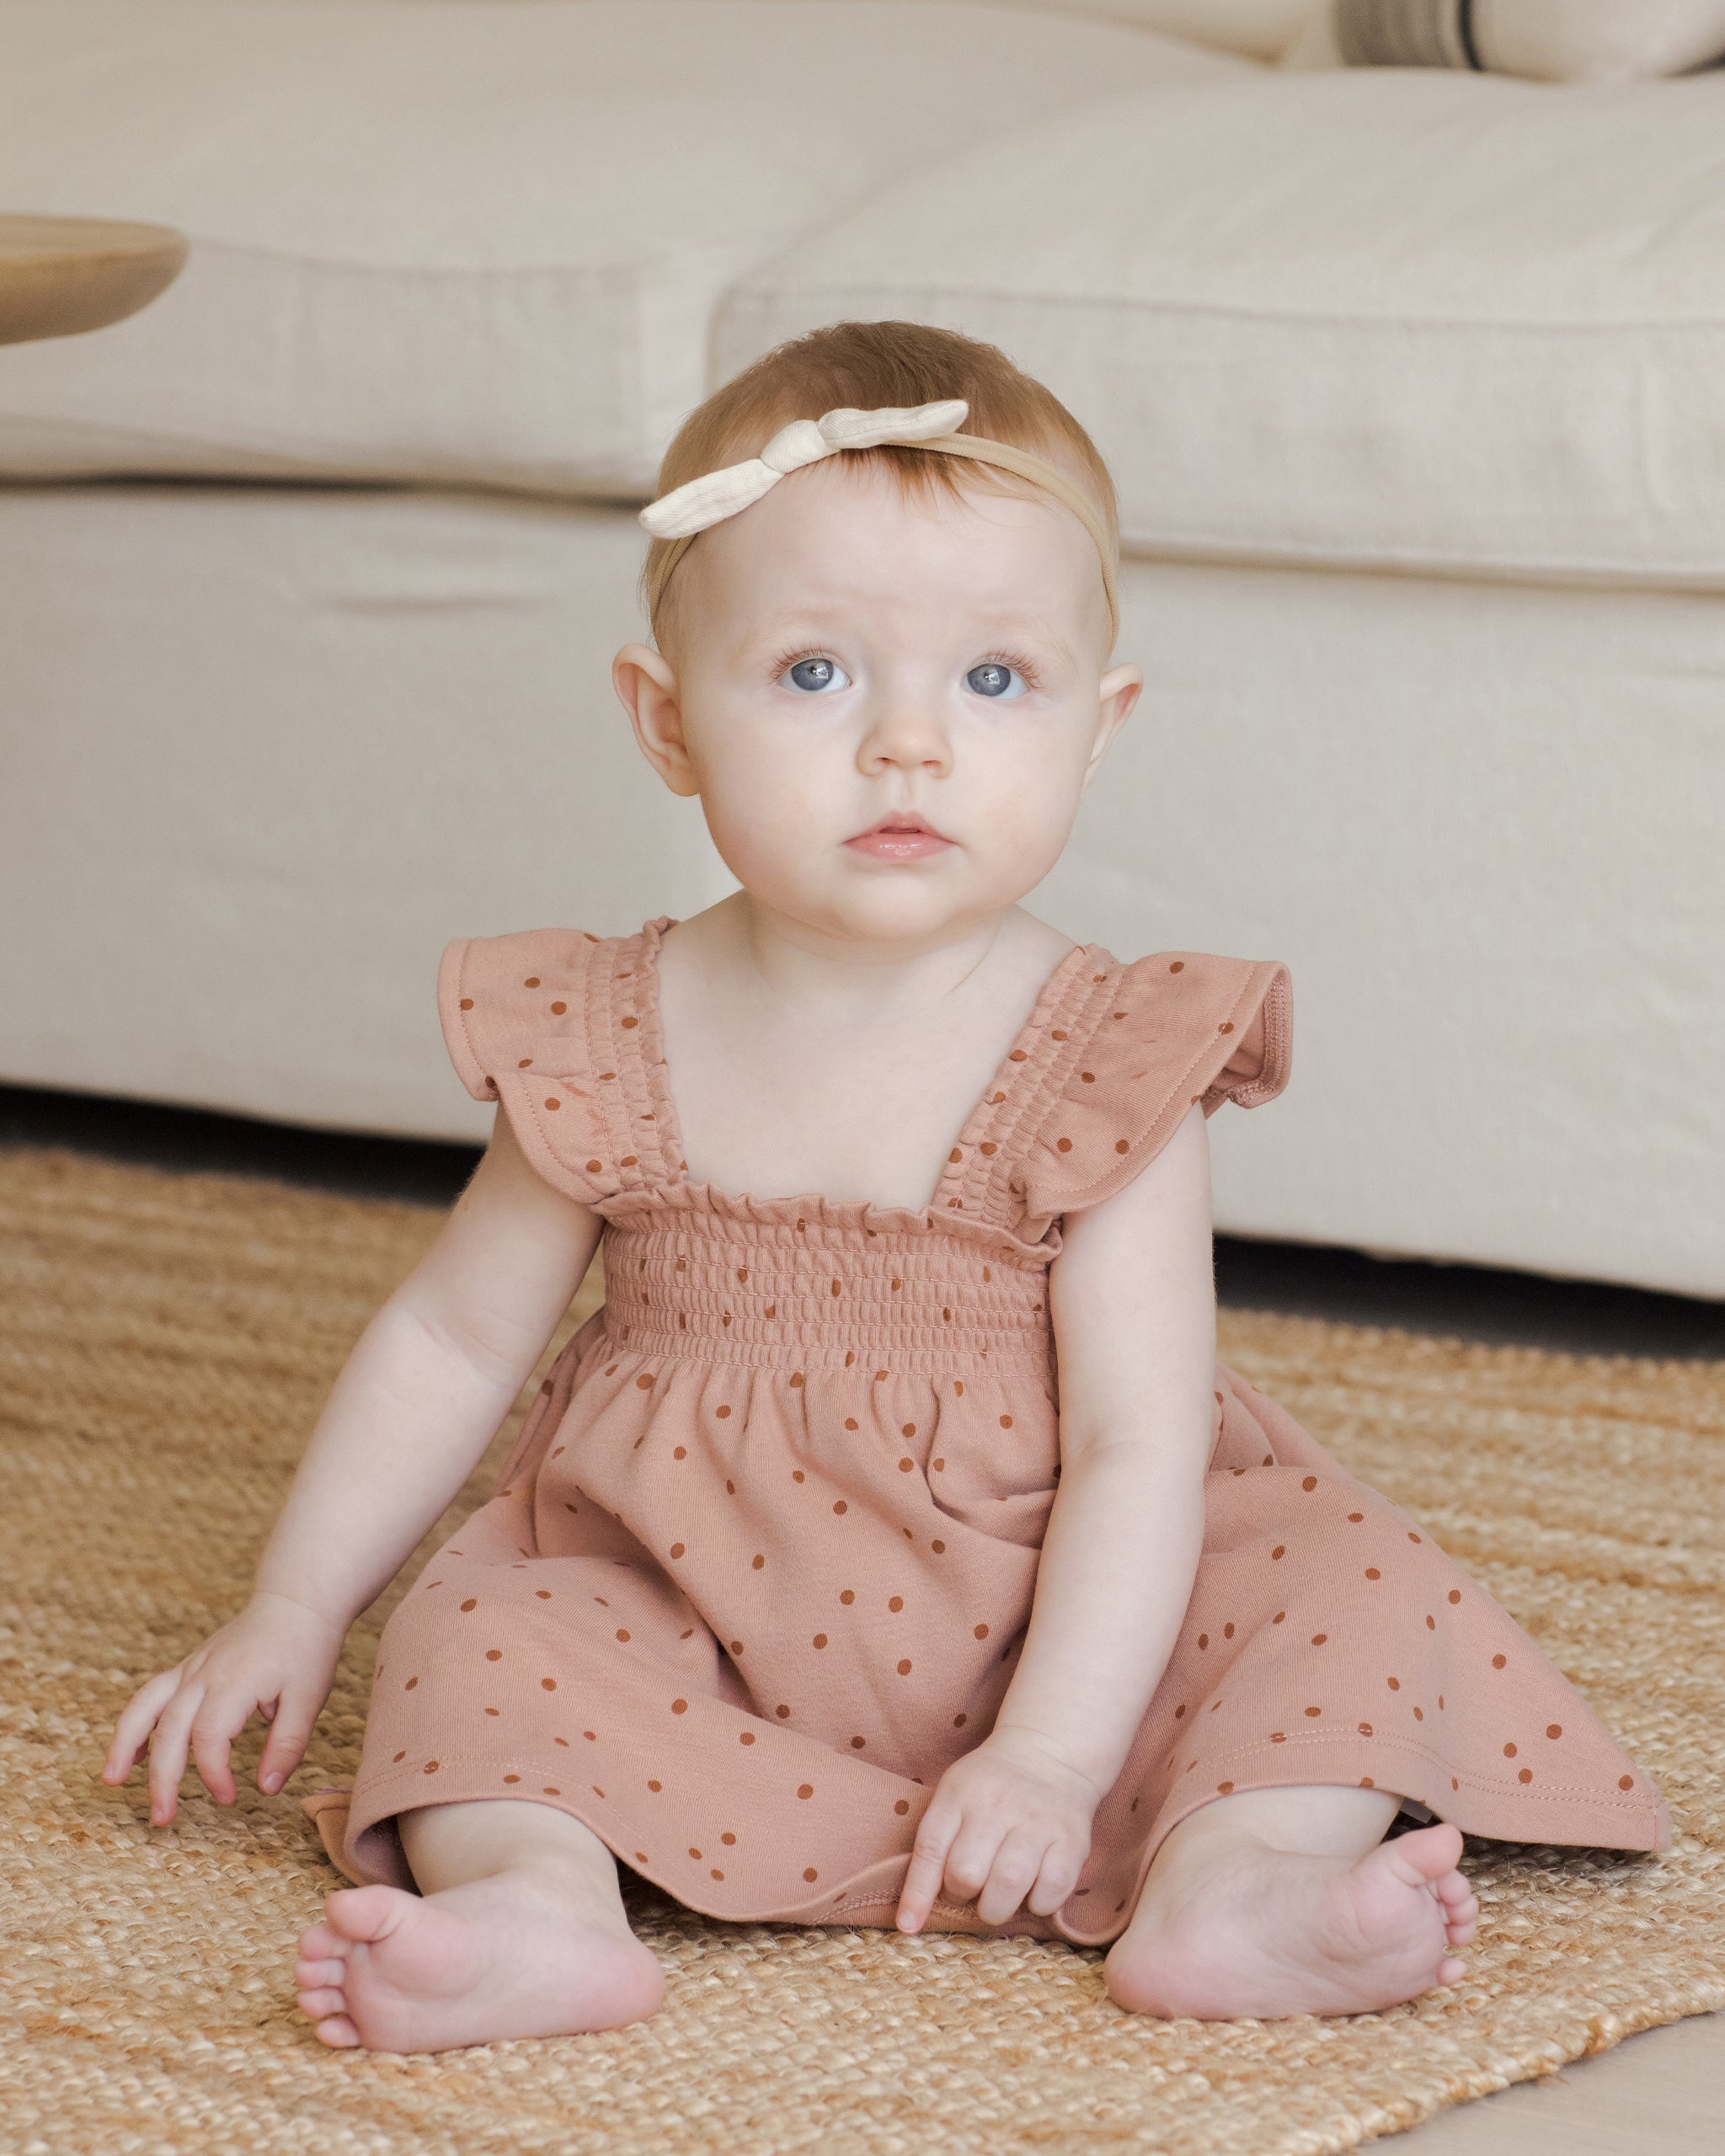 Smocked Jersey Dress || Polka Dot - Rylee + Cru | Kids Clothes | Trendy Baby Clothes | Modern Infant Outfits |